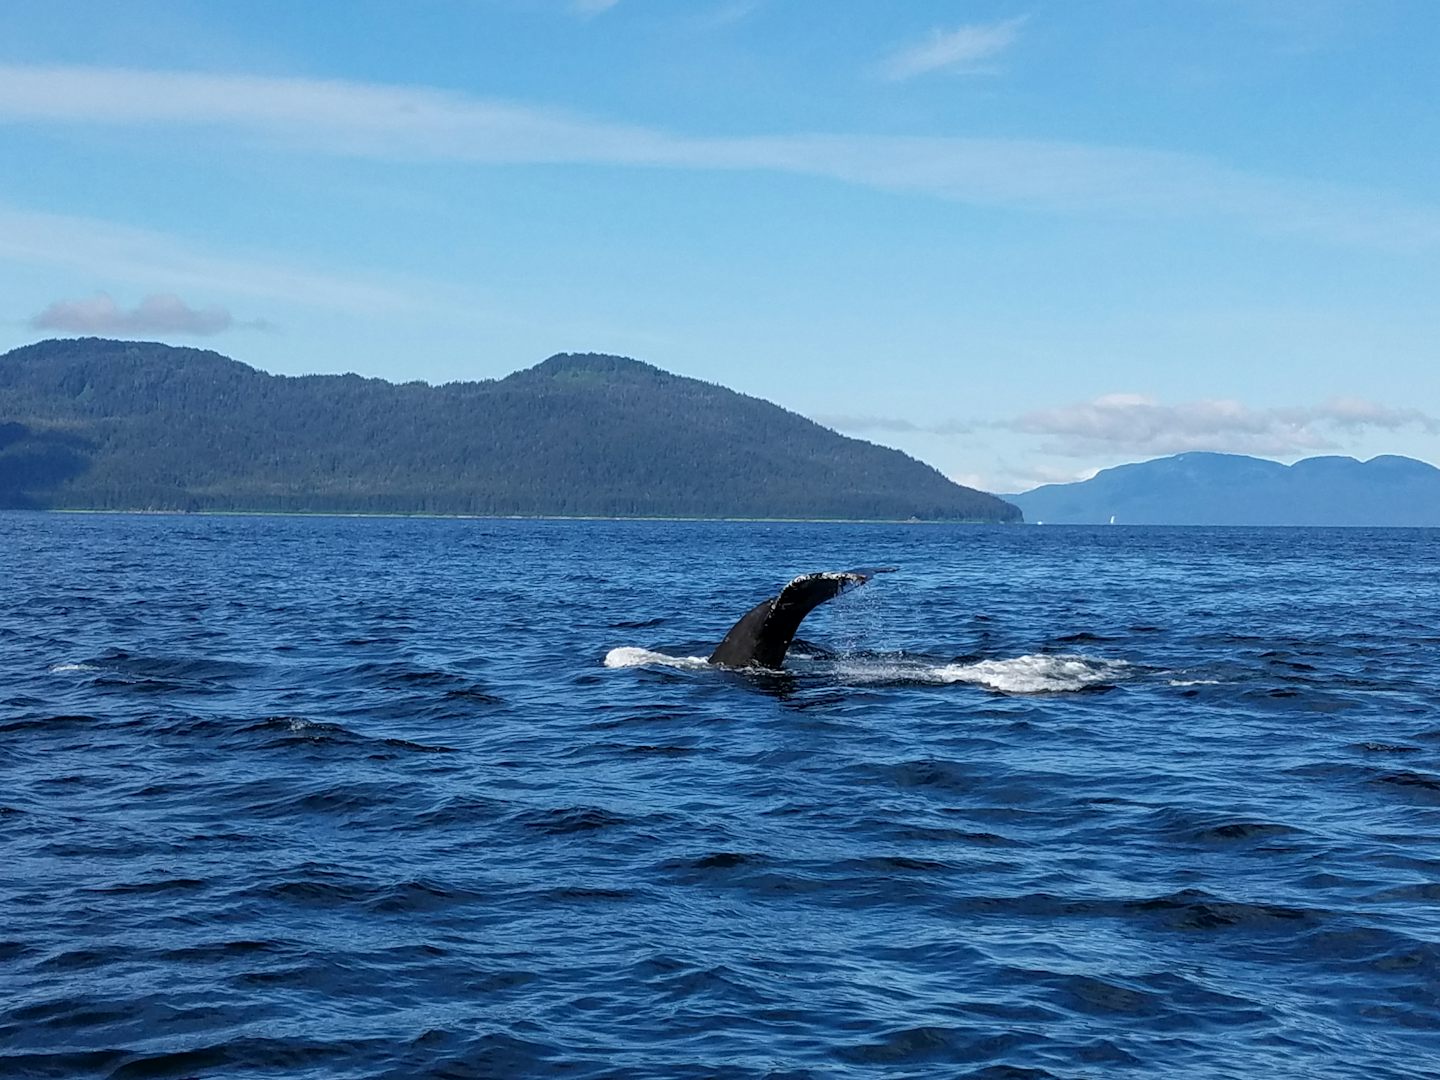 Whale watching with Icy Strait Whale Adventures was great!